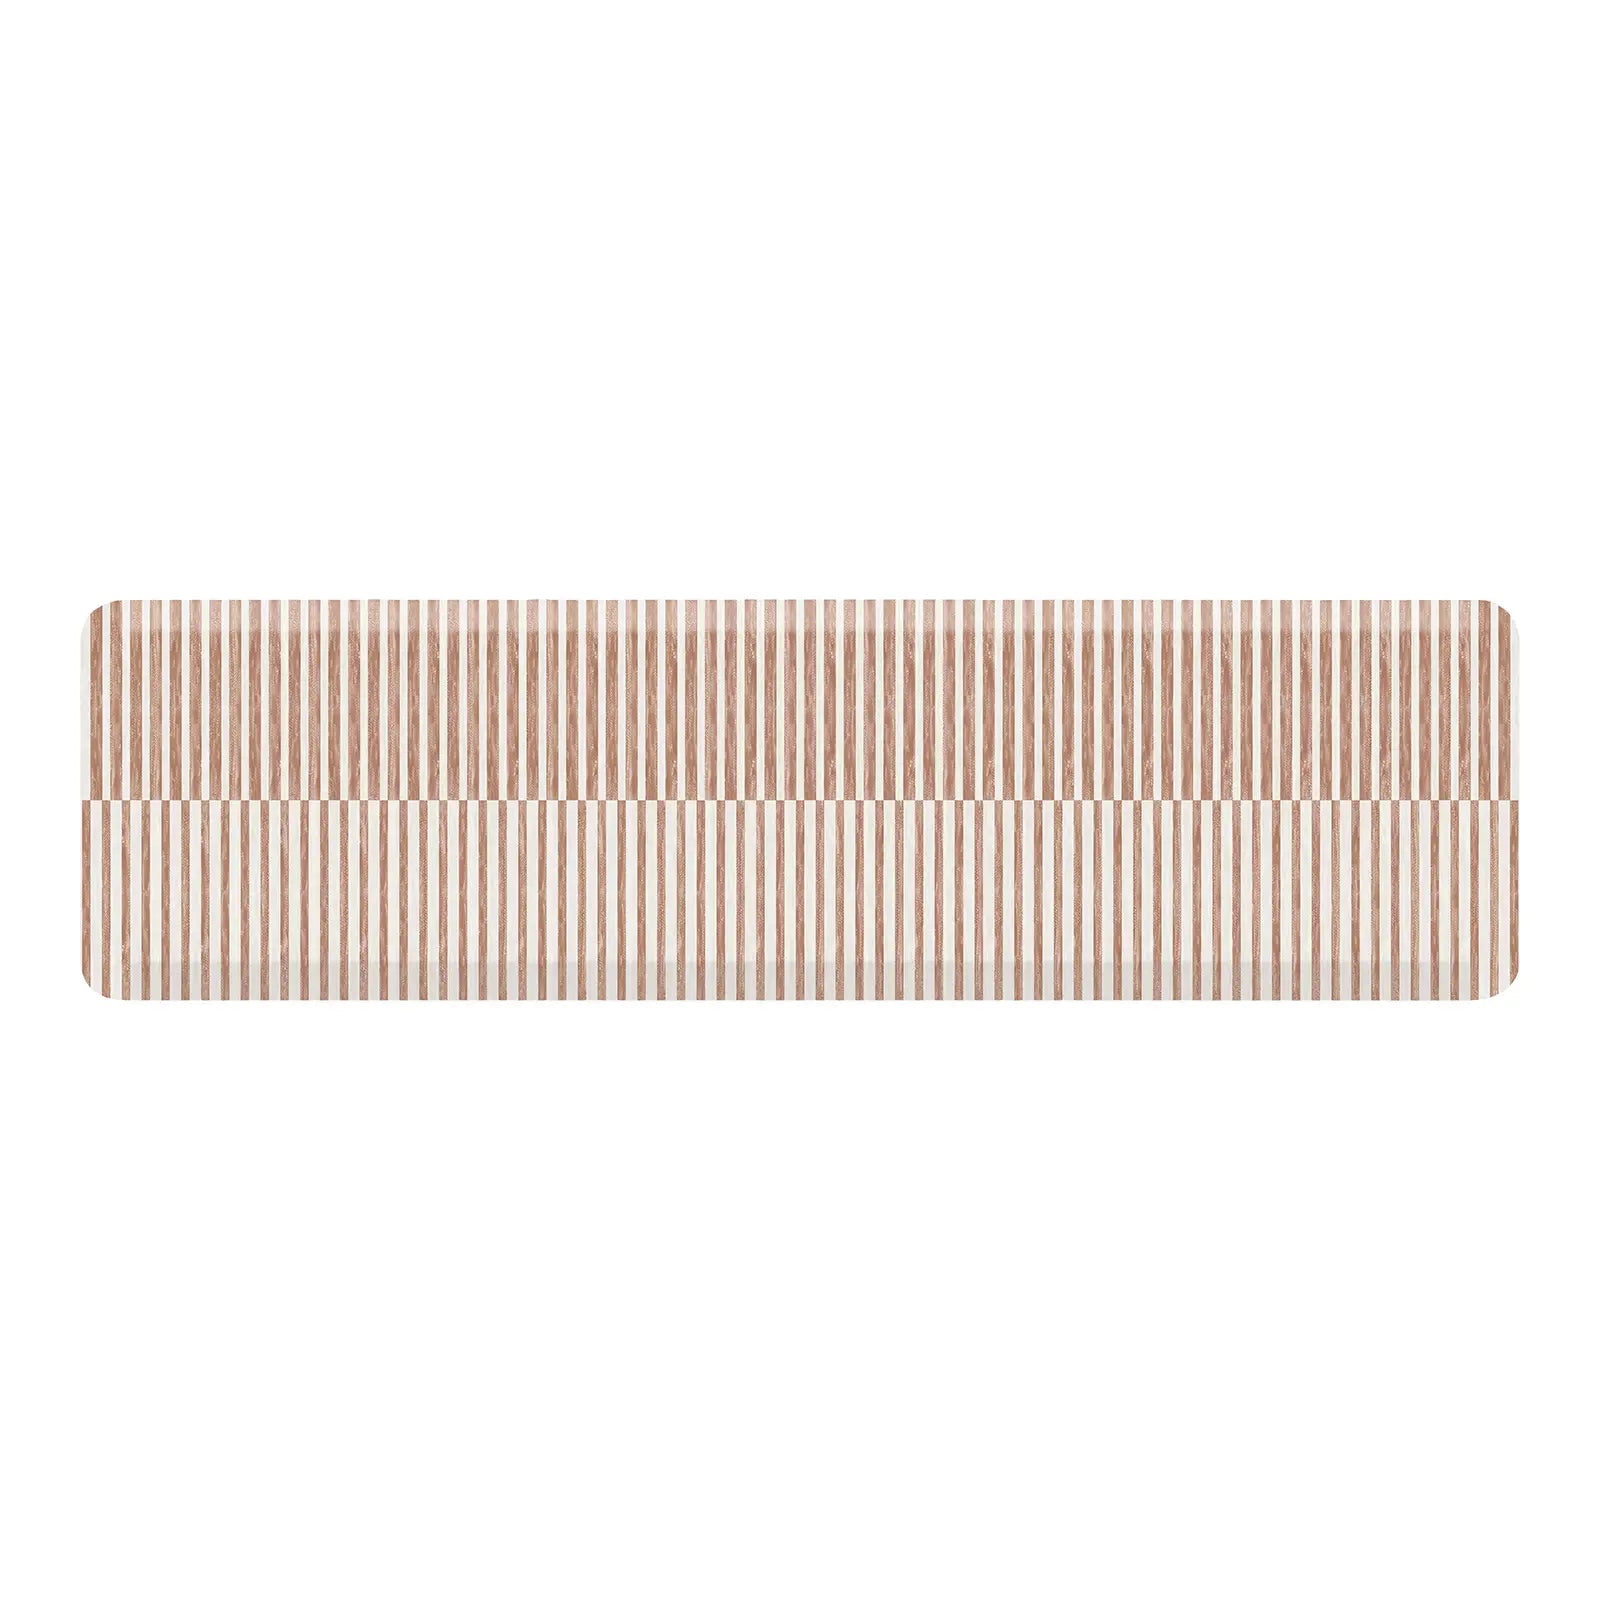 Reese terracotta brown and white inverted stripe standing mat shown in size 20x72